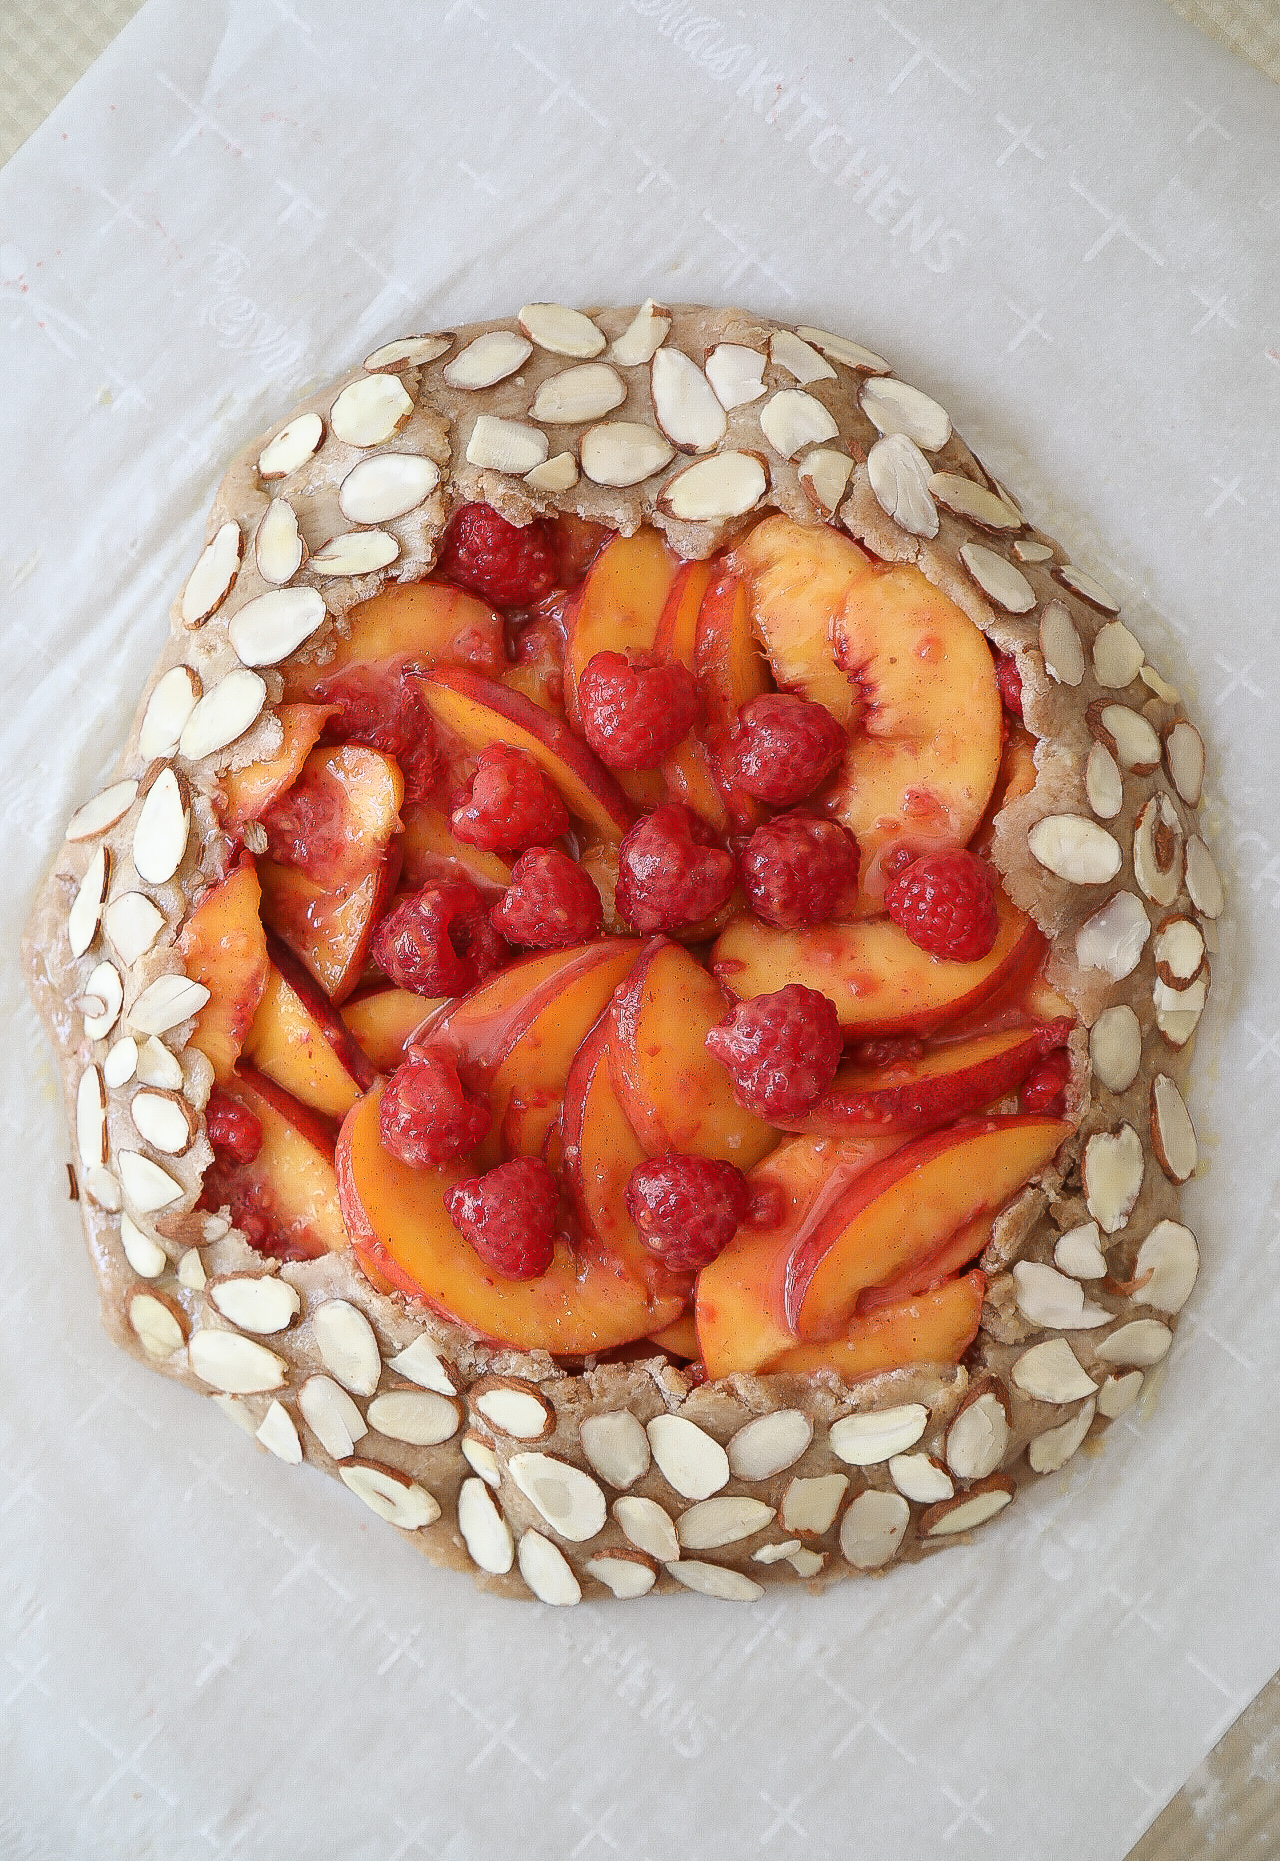 Peach and Raspberry Galette with Almond Crust.